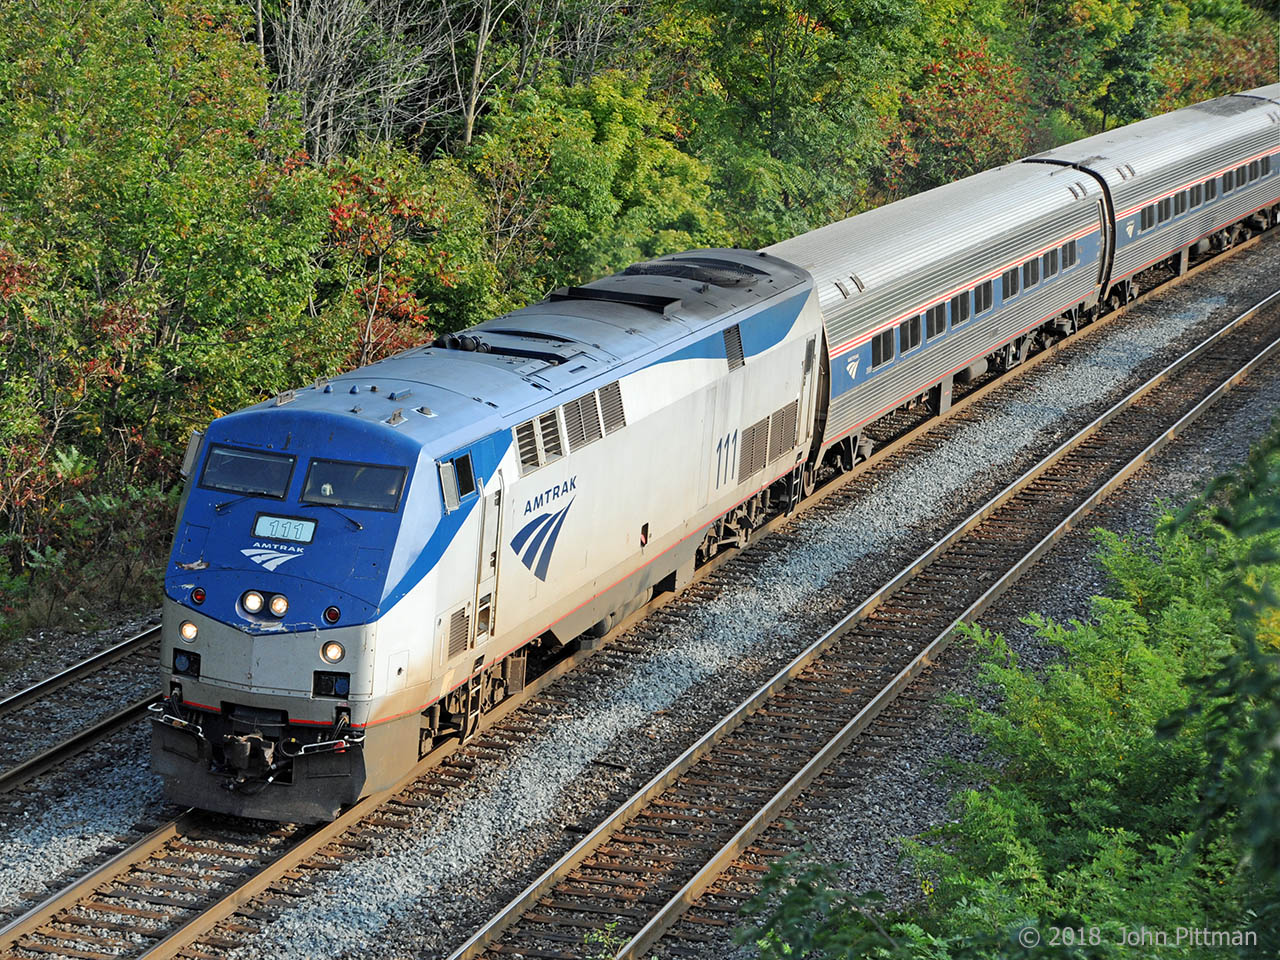 Train VIA 97 (= Amtrak train 64) lead by AMTK 111 (P42dc) with Metroliner coaches is between control points CN Snake and CN Bayview, close to Bayview Jct T2 and T3 signals for westbounds.  Early autumn leaf colour is starting to appear.